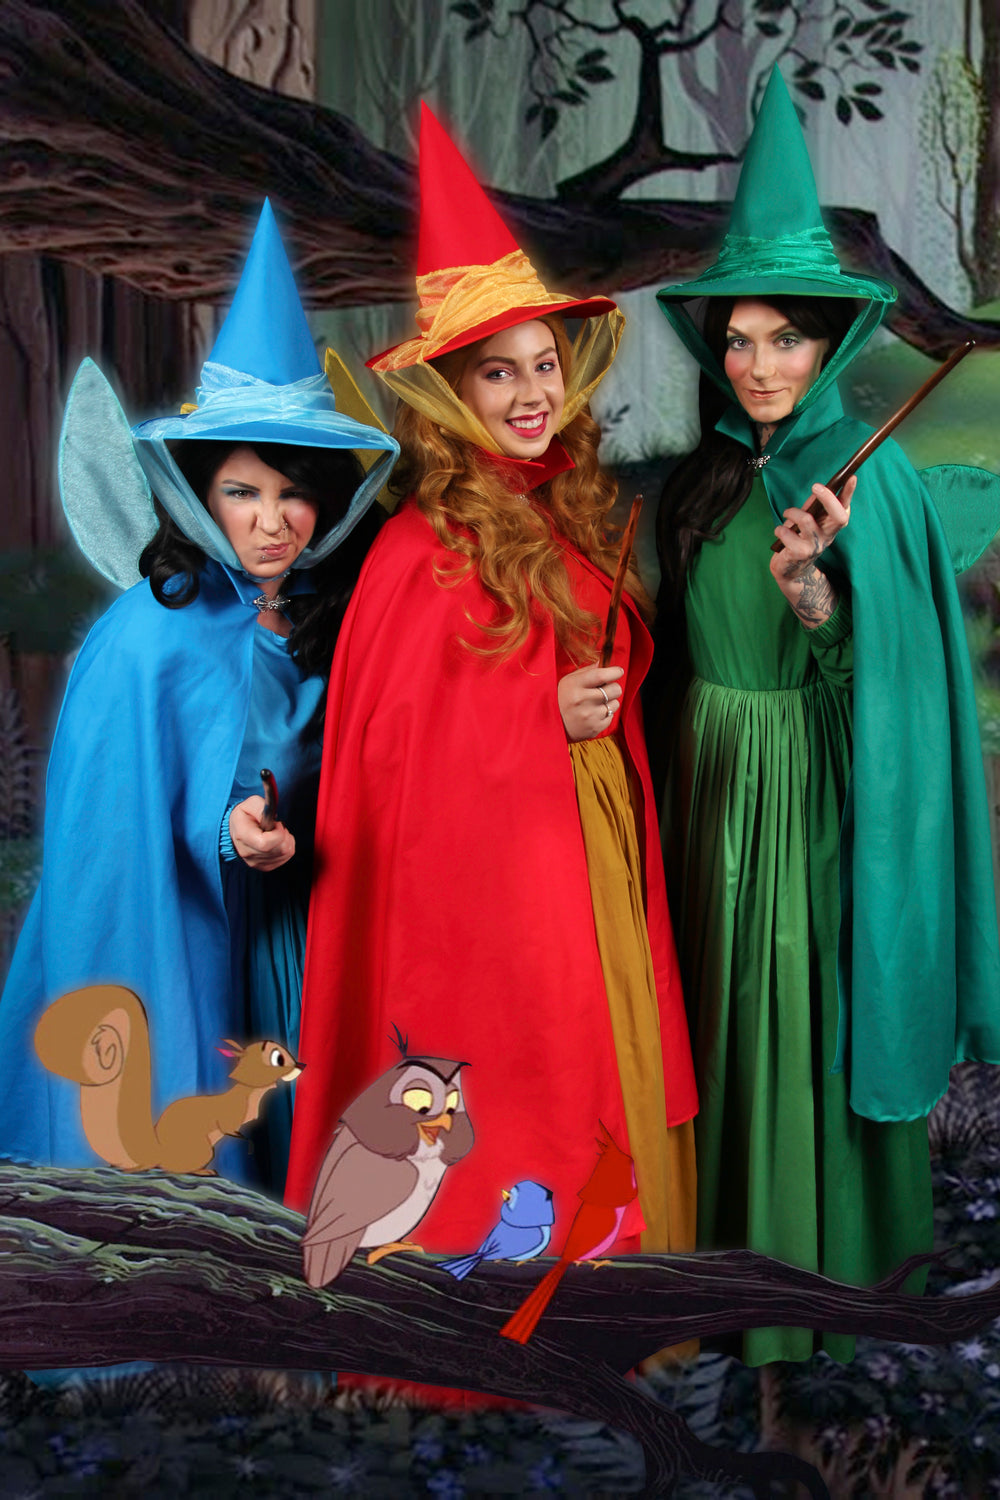 Sleeping Beauty the Three Good Fairies, Flora Fauna & Merryweather Costume Hire or Cosplay, plus Makeup and Photography. Proudly by and available at, Little Shop of Horrors Costumery 6/1 Watt Rd Mornington & Melbourne